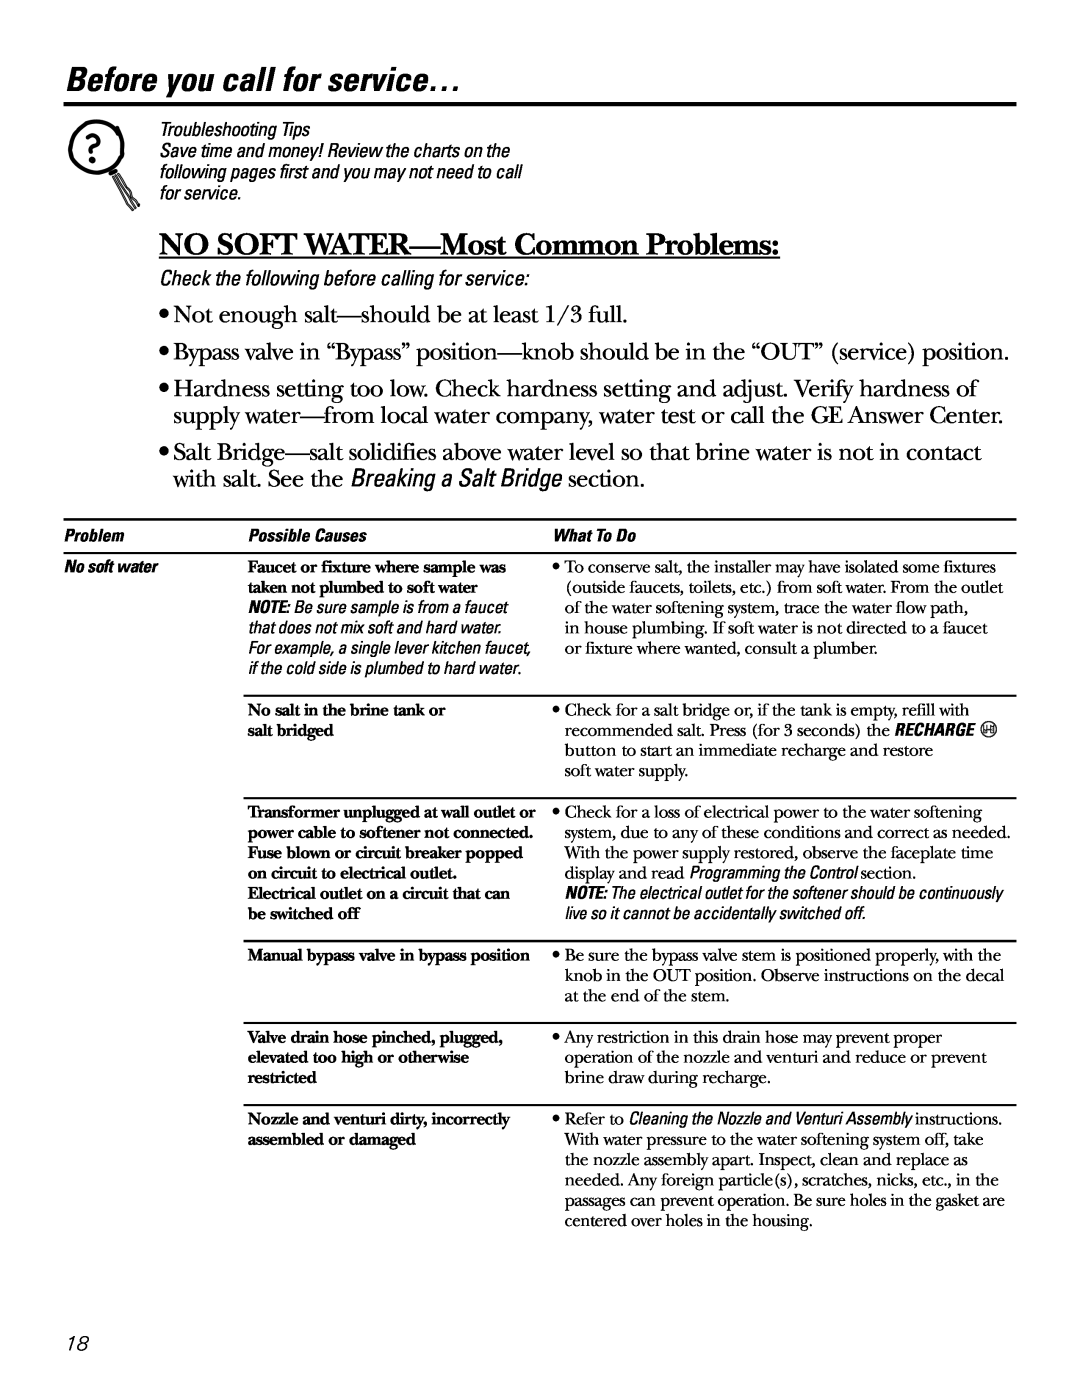 GE GXSF27E manual Before you call for service…, NO SOFT WATER-MostCommon Problems 